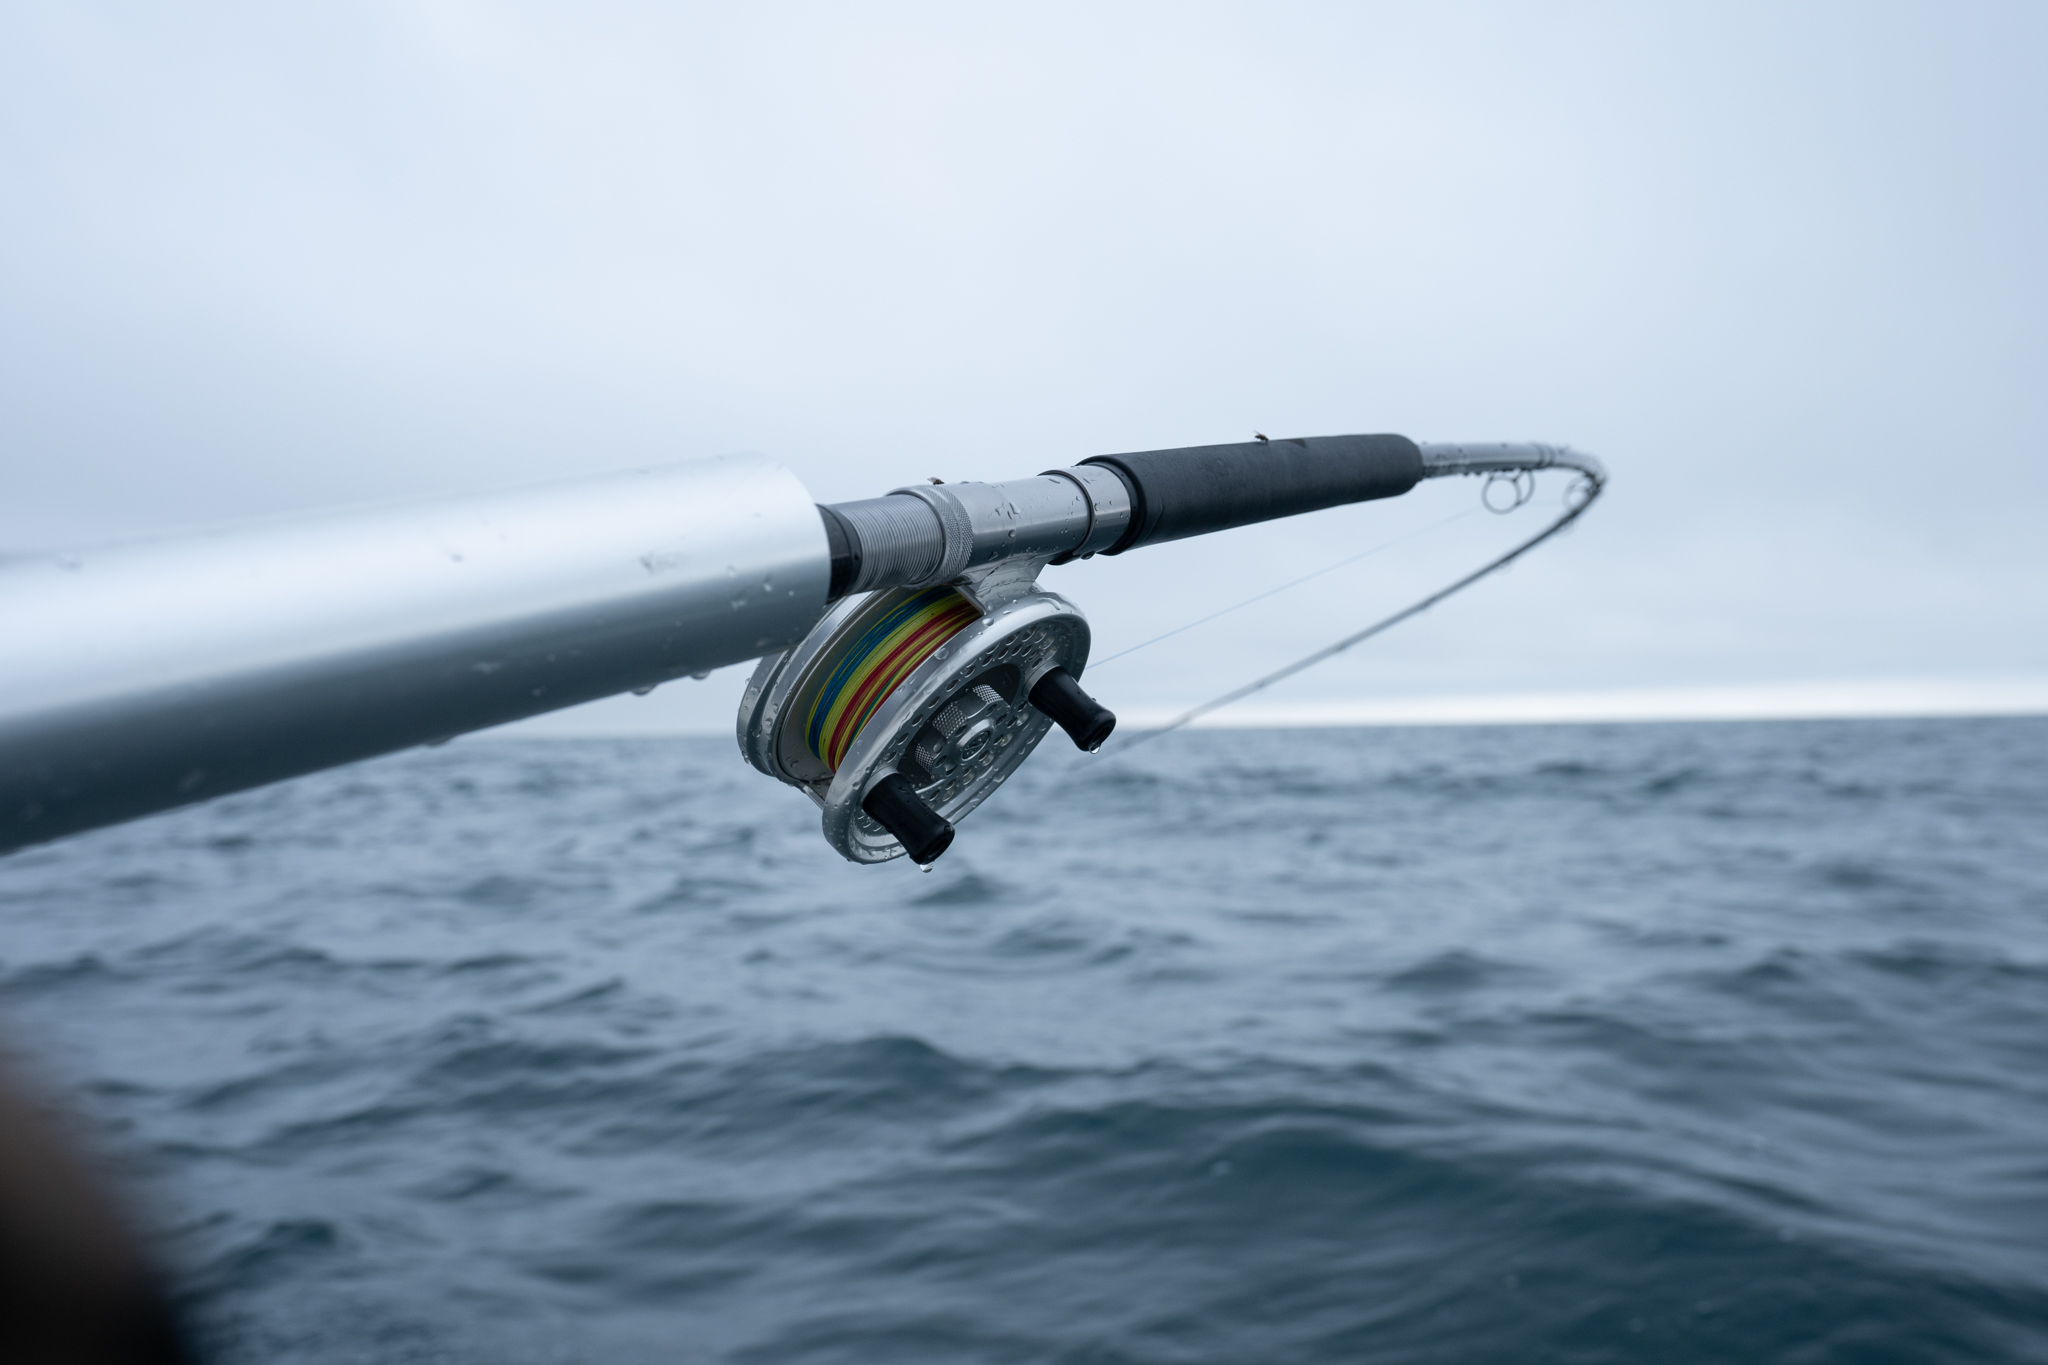 Islander Reel and Shimano Convergence for Salmon Trolling « Fishing with Rod  Blog